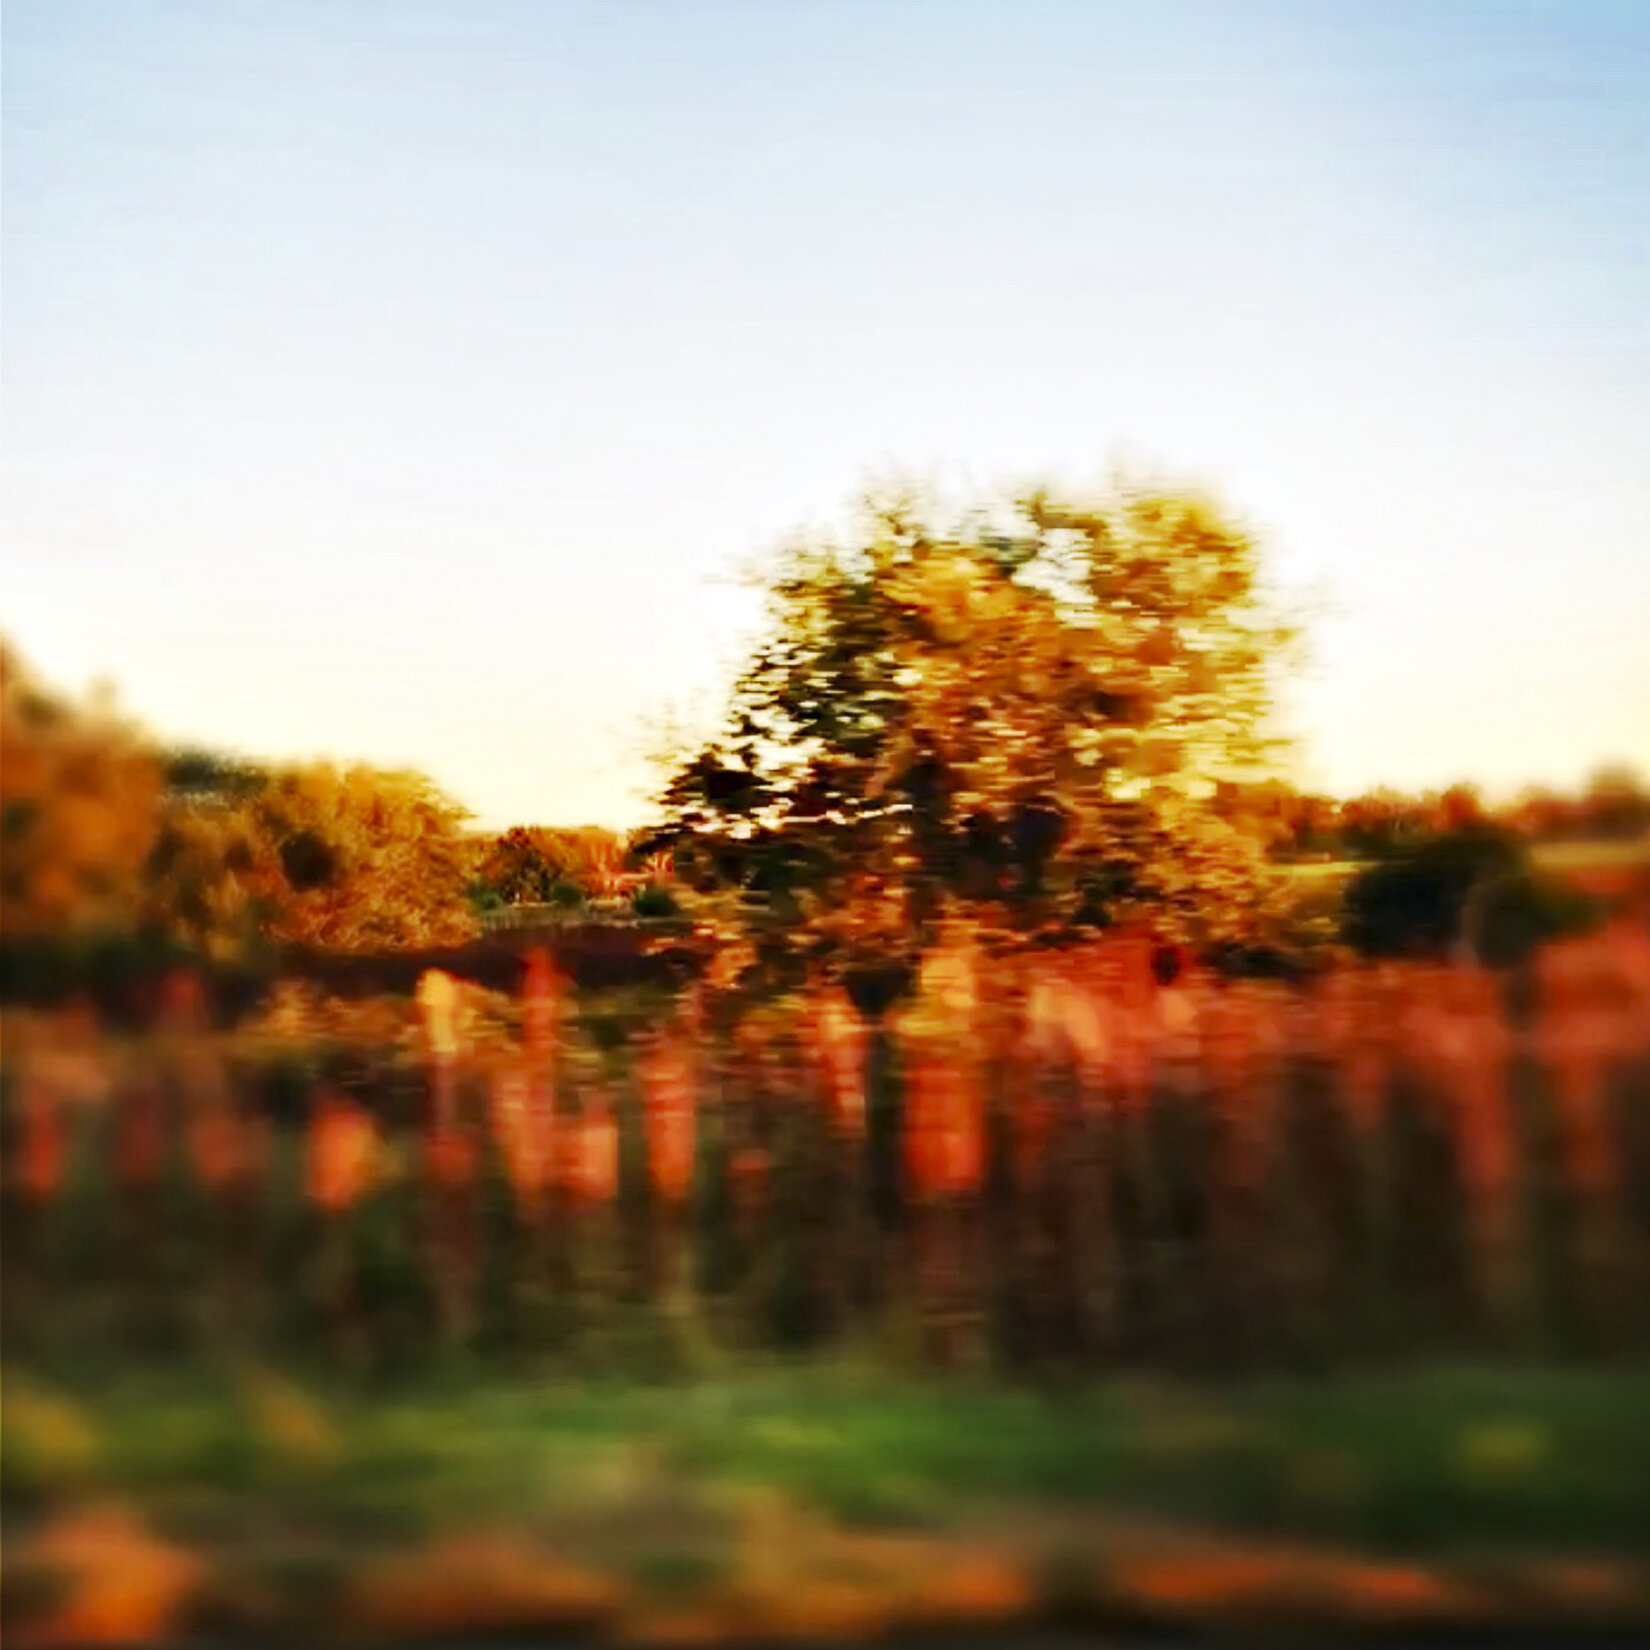 26. On the Road #2, Midwest  2019 color  11_11 in.jpg